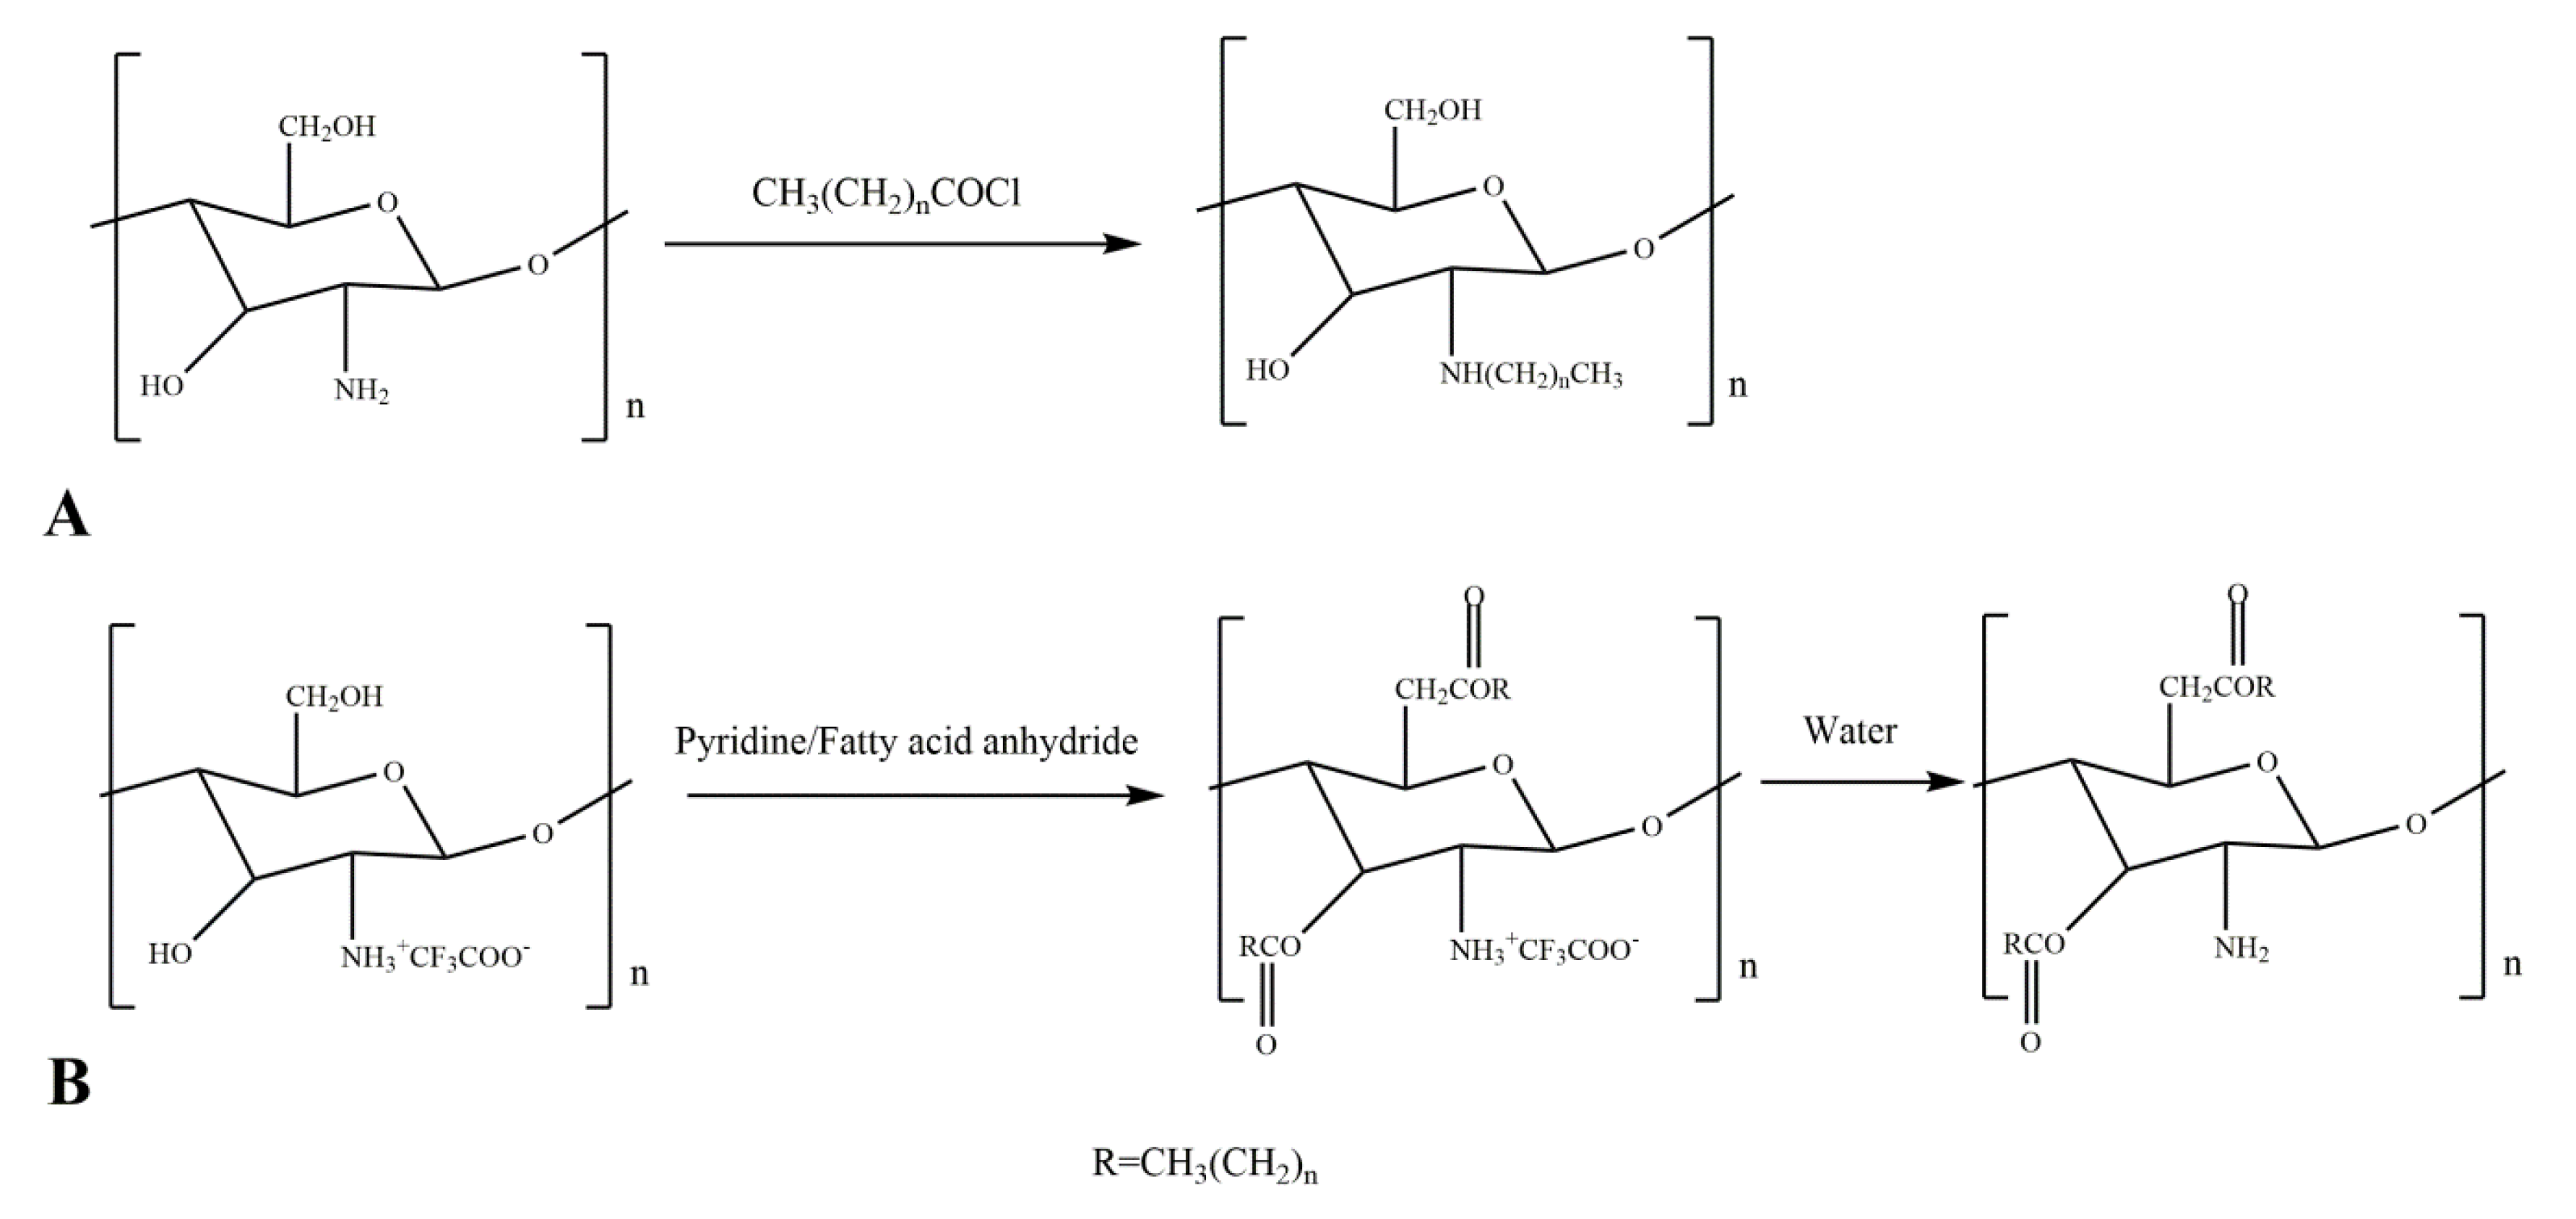 Ijms Free Full Text Chitosan Derivatives And Their Application In Biomedicine Html